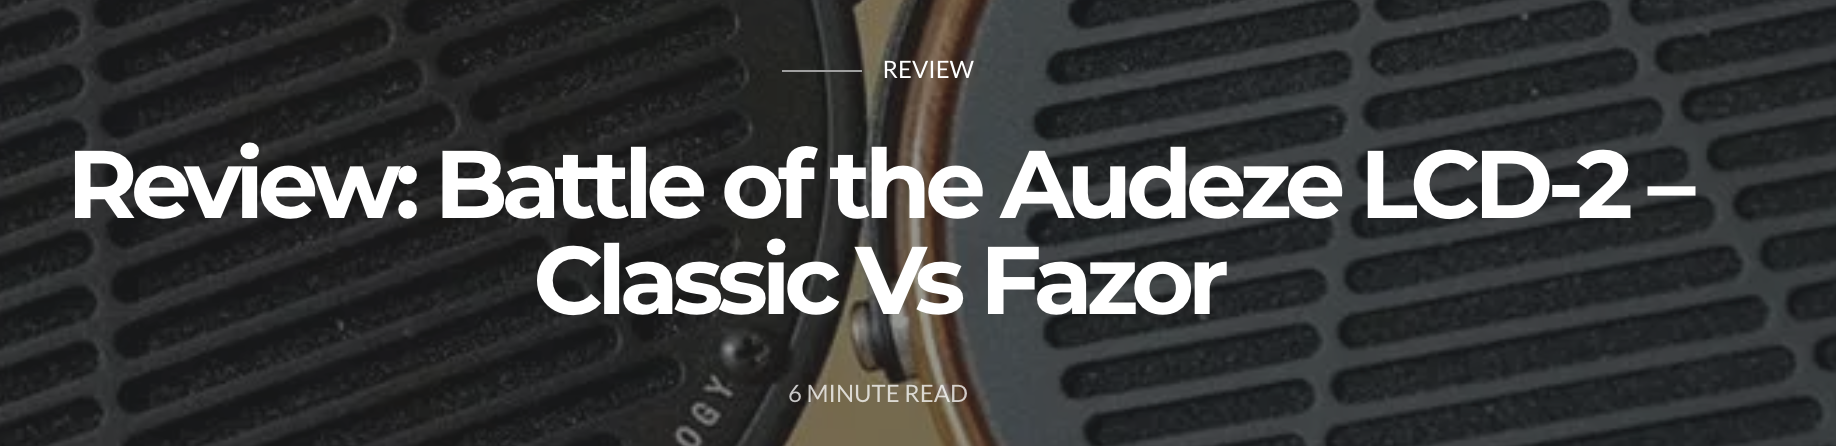 Audeze LCD-2 Classic vs. LCD-2 - A Comparative Review from Jean Mouchet at Headphonesty